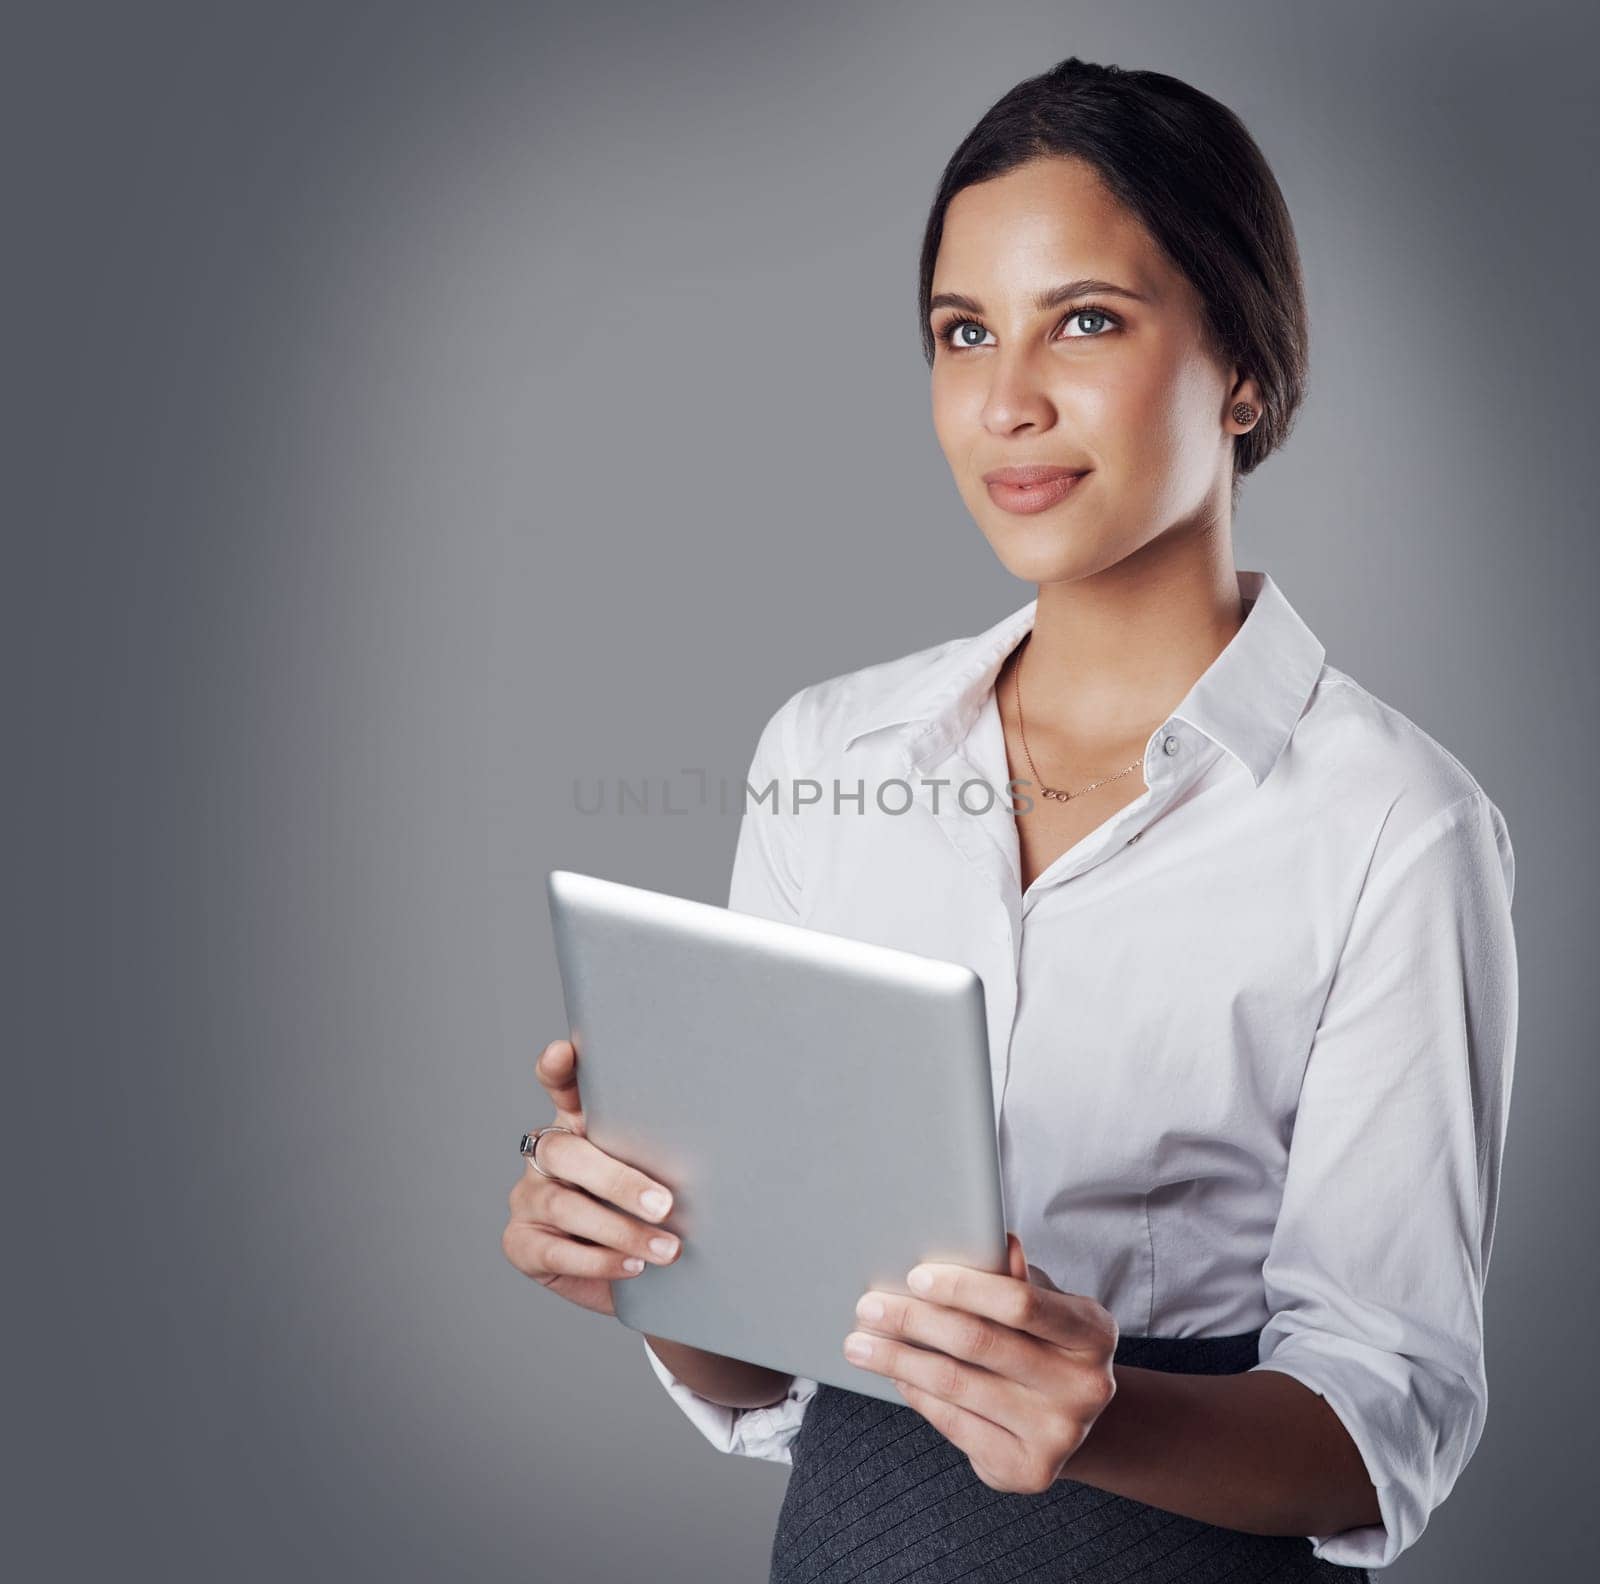 Staying organized and connected with cutting edge technology. Studio shot of a young businesswoman using a digital tablet against a gray background. by YuriArcurs